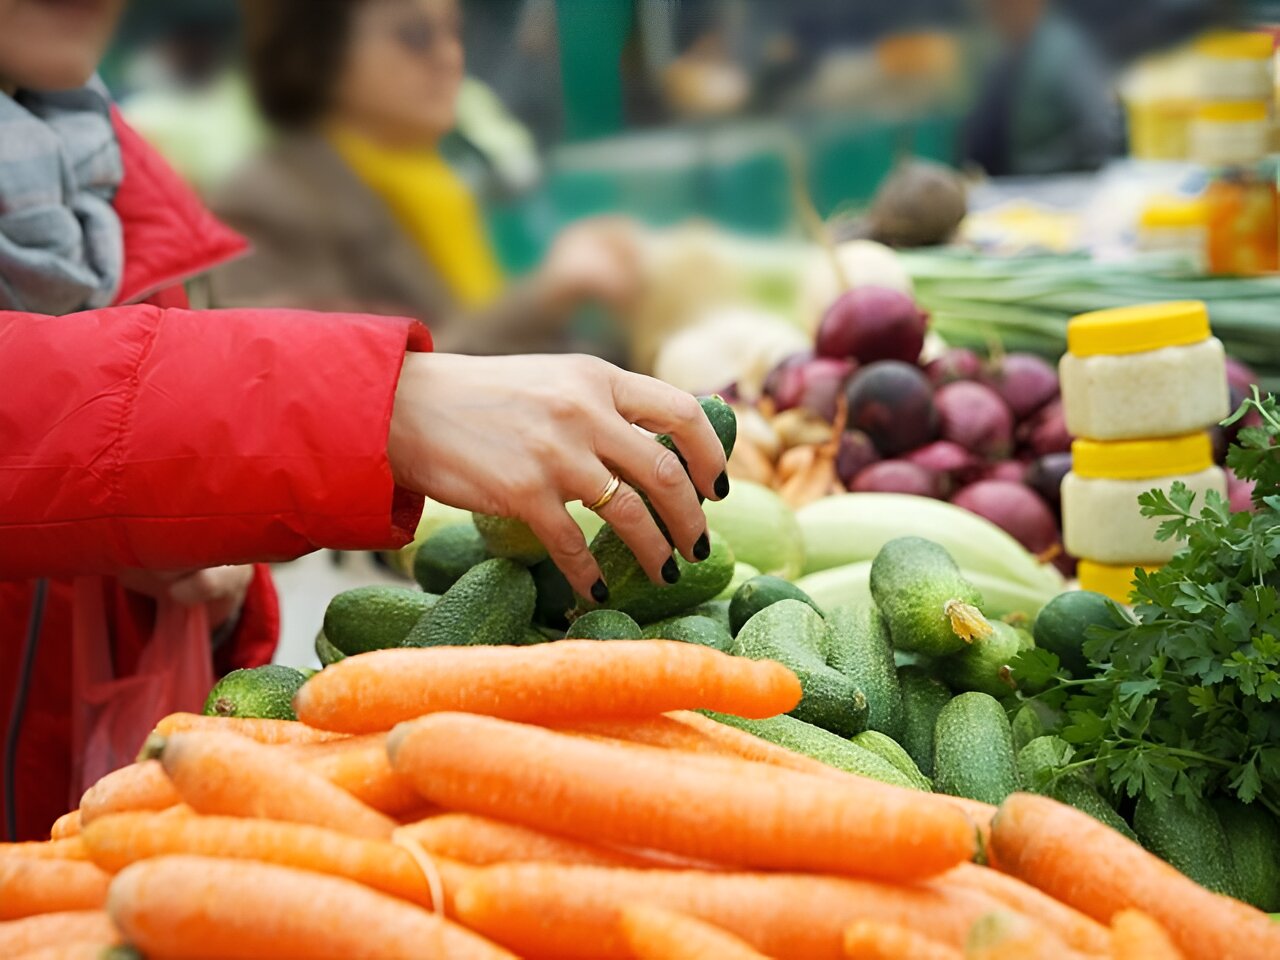 Healthy eating doesn’t have to be expensive: An expert offers tips